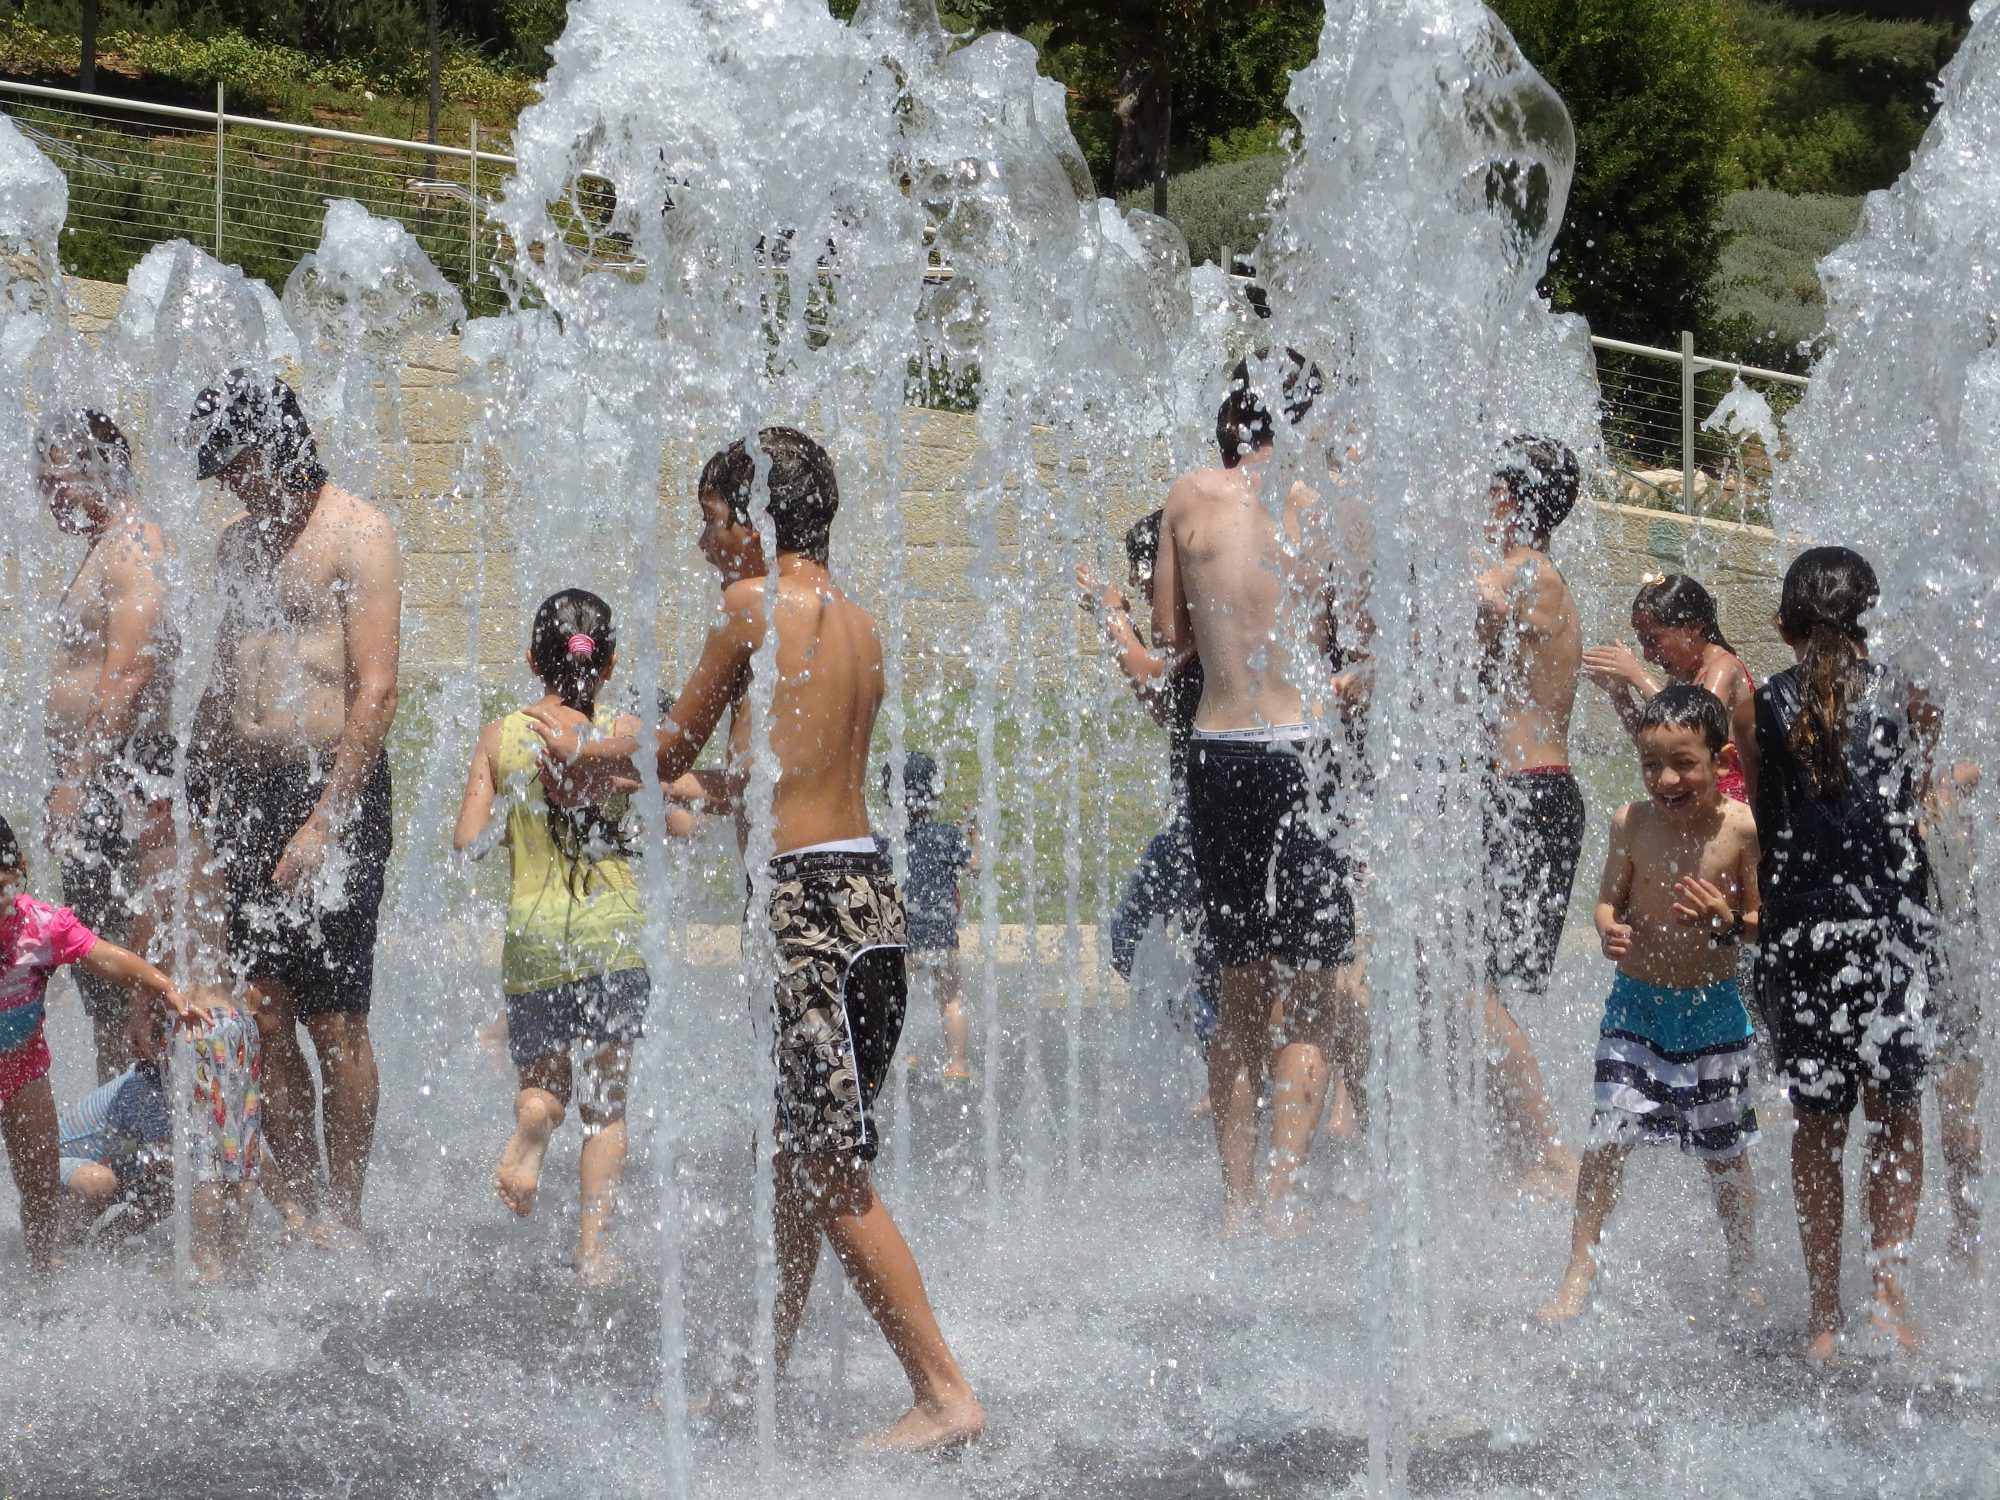 A fountain just below the old walled city of Jerusalem offers relief from the summer heat.